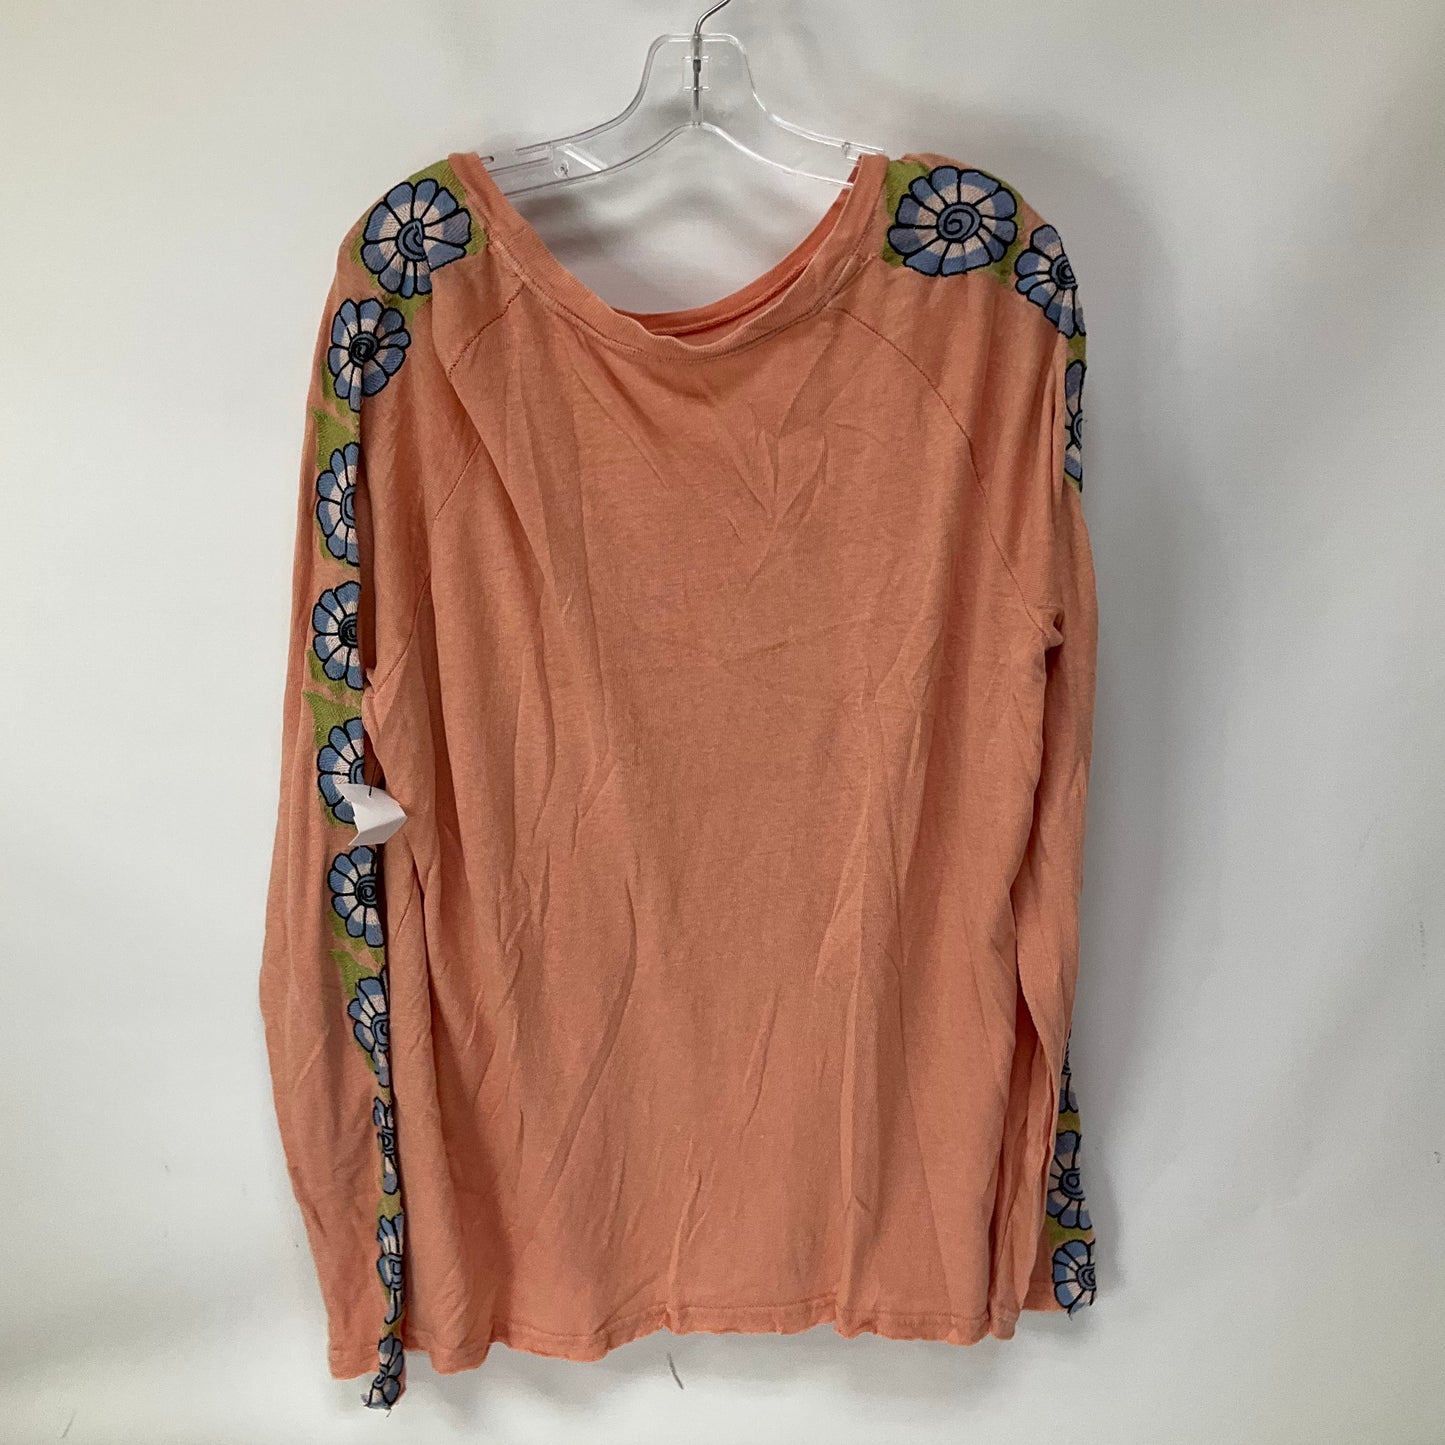 Peach Top Long Sleeve Free People, Size M